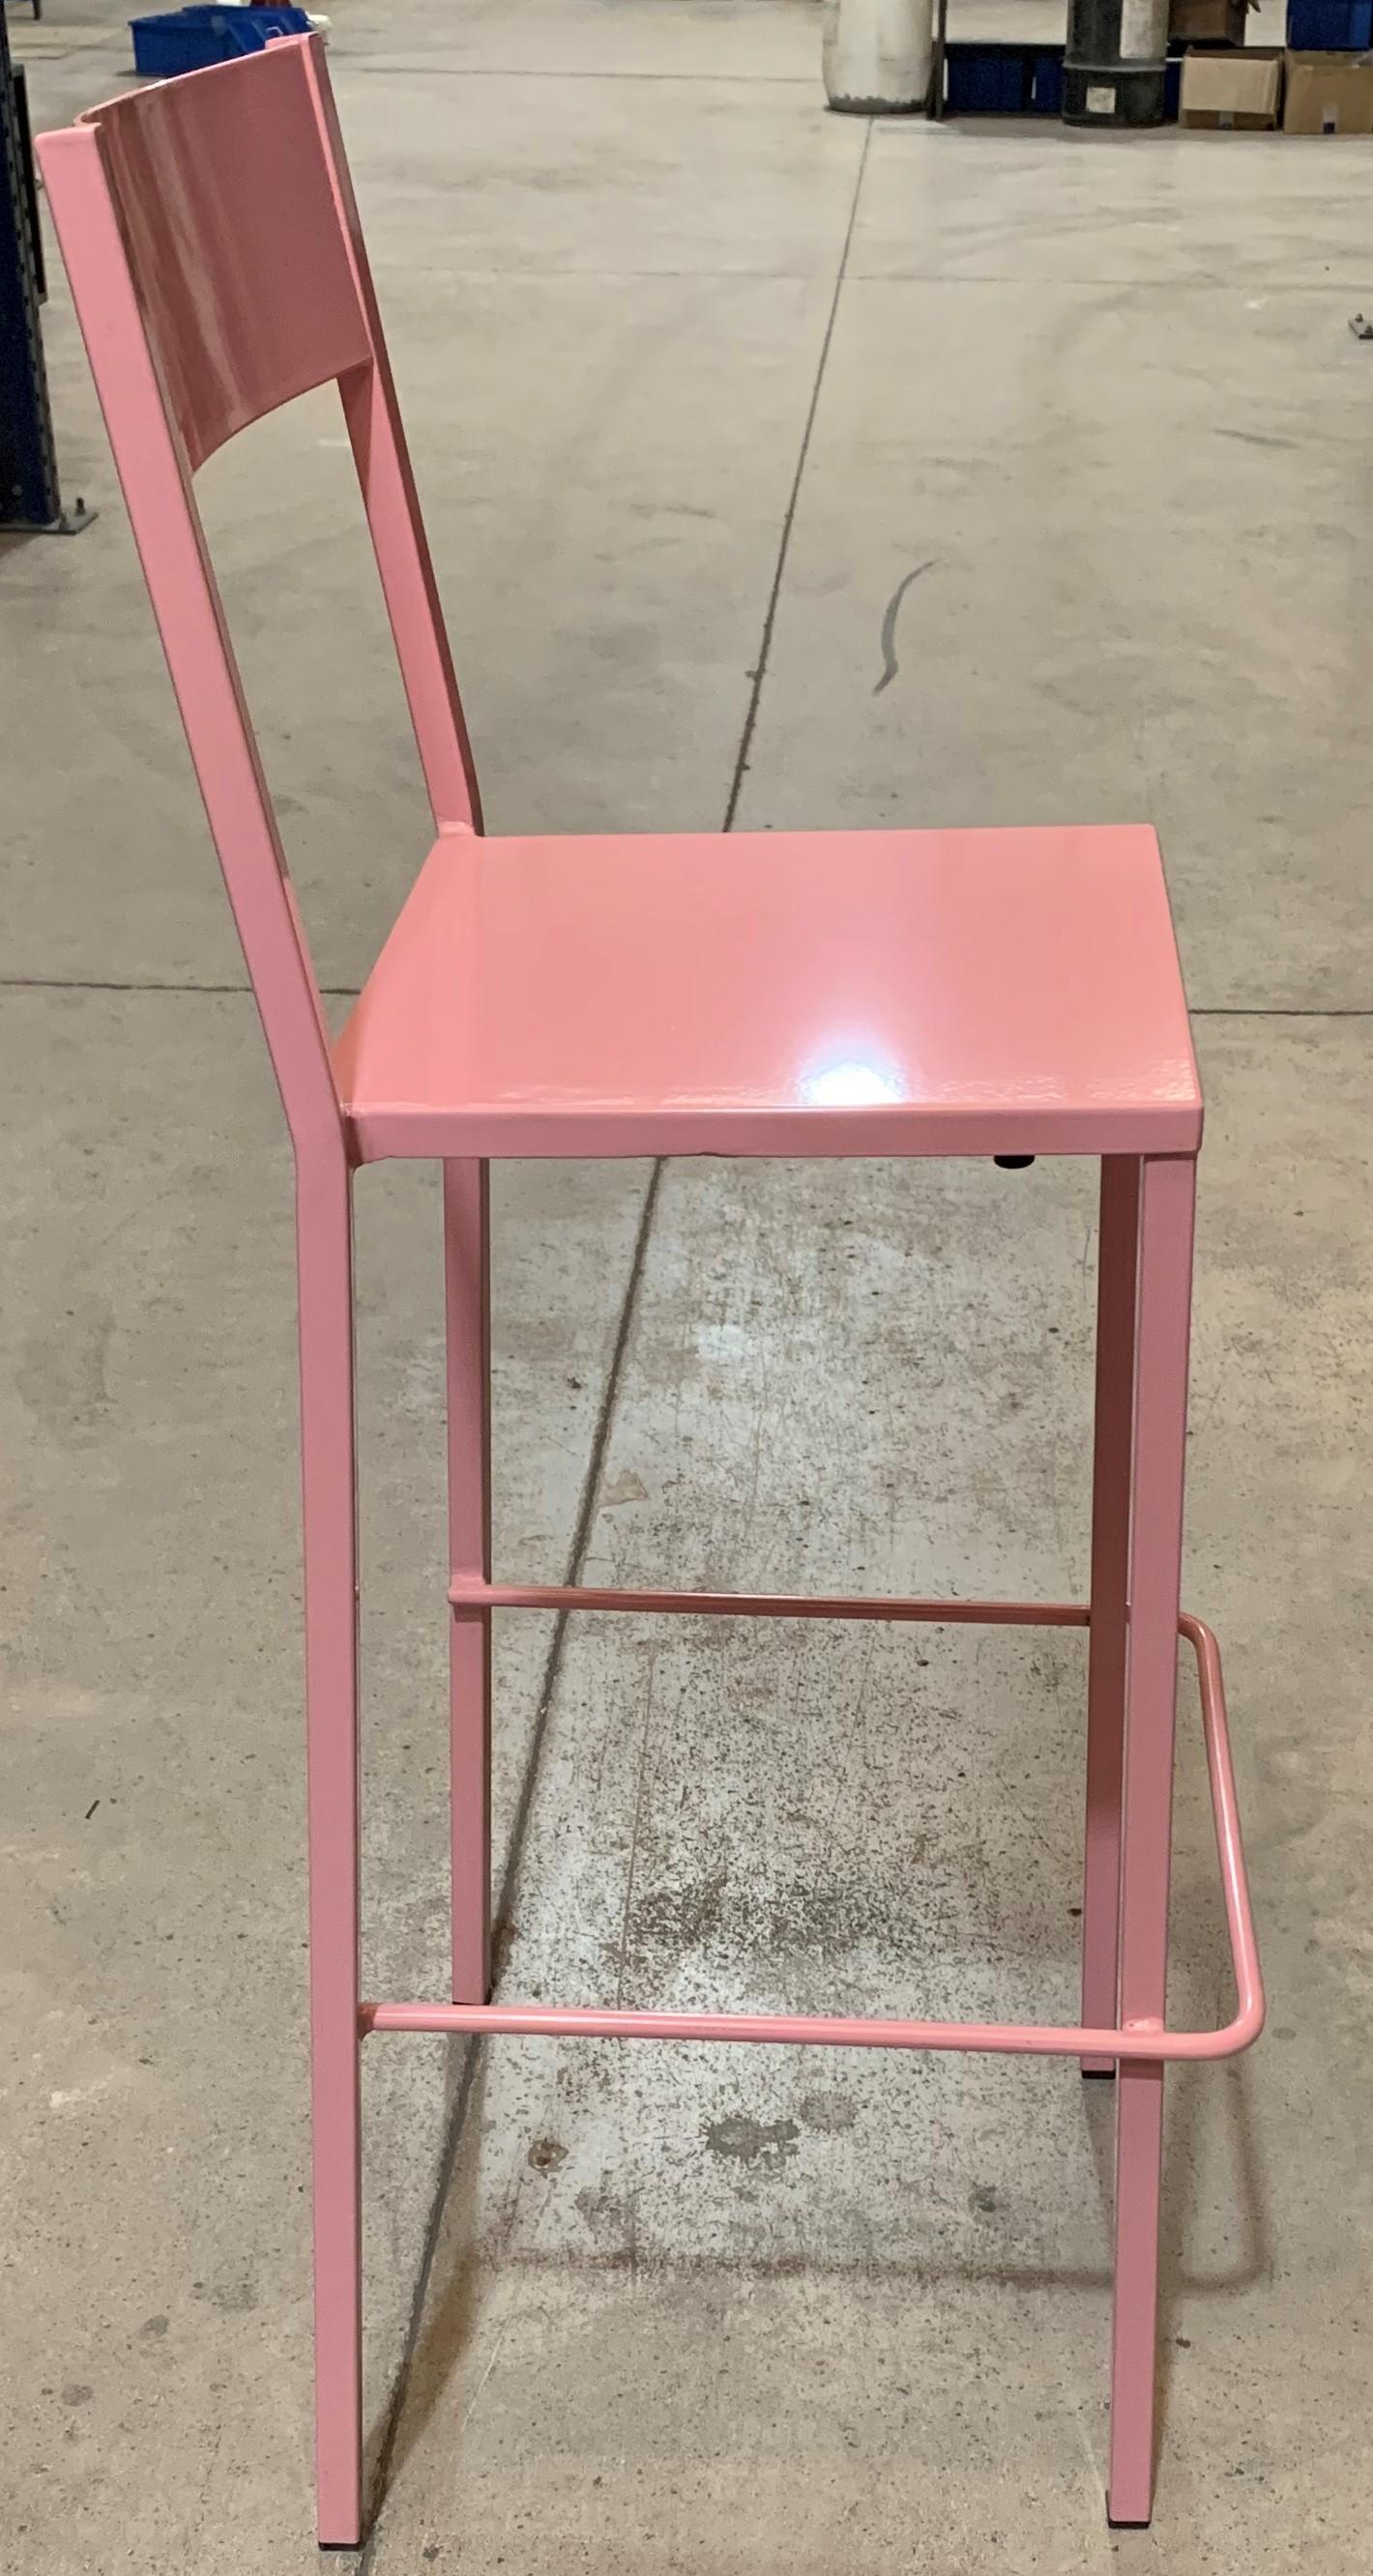 Industrial, counter height, shop stool features a wrought iron frame and seat.
You can customize the measurements, colors and the seat (wood or iron).
      